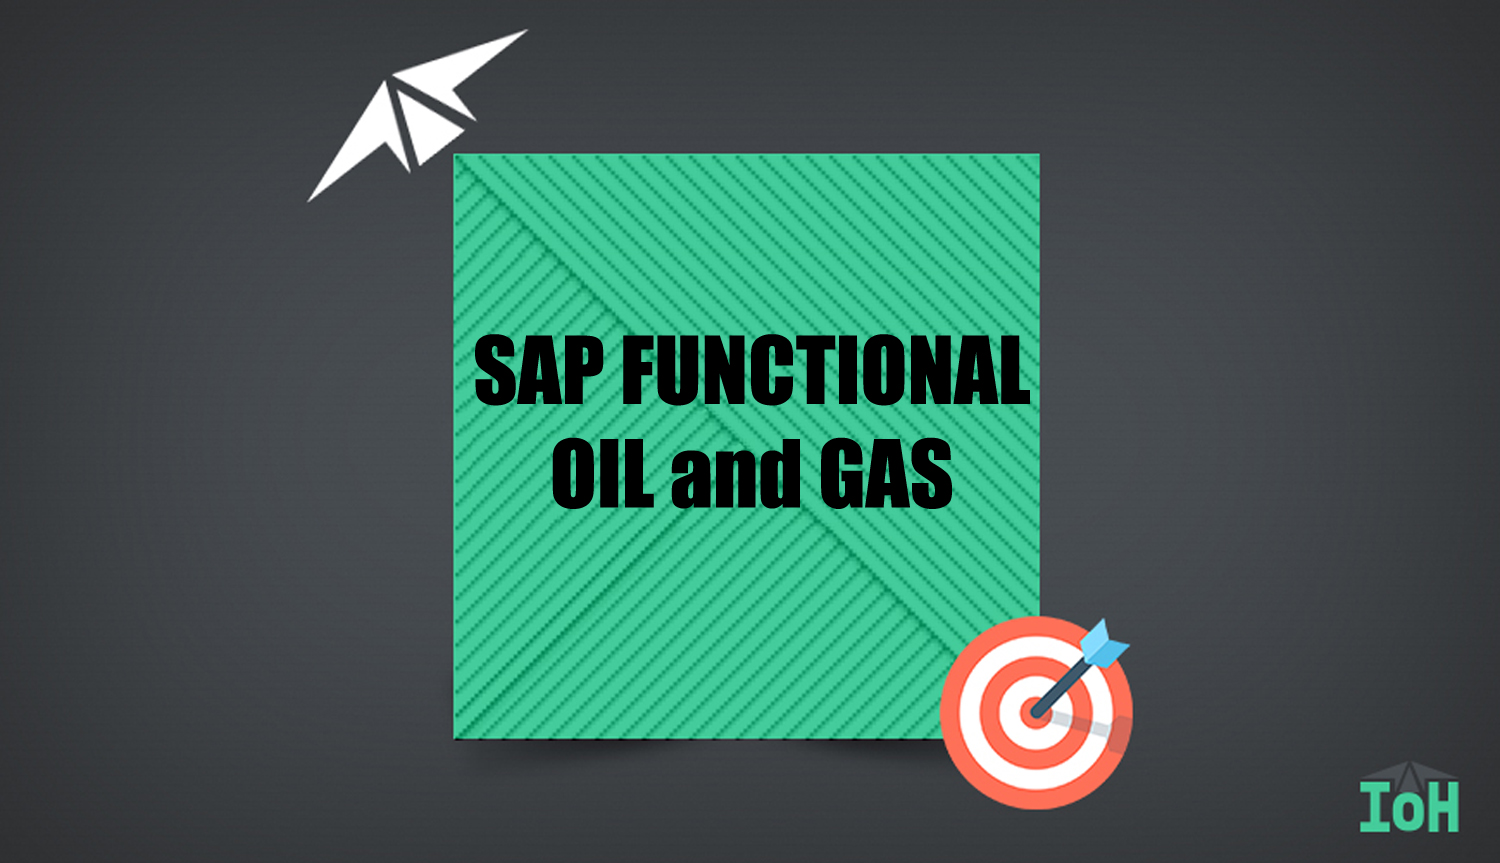 SAP OIL and GAS